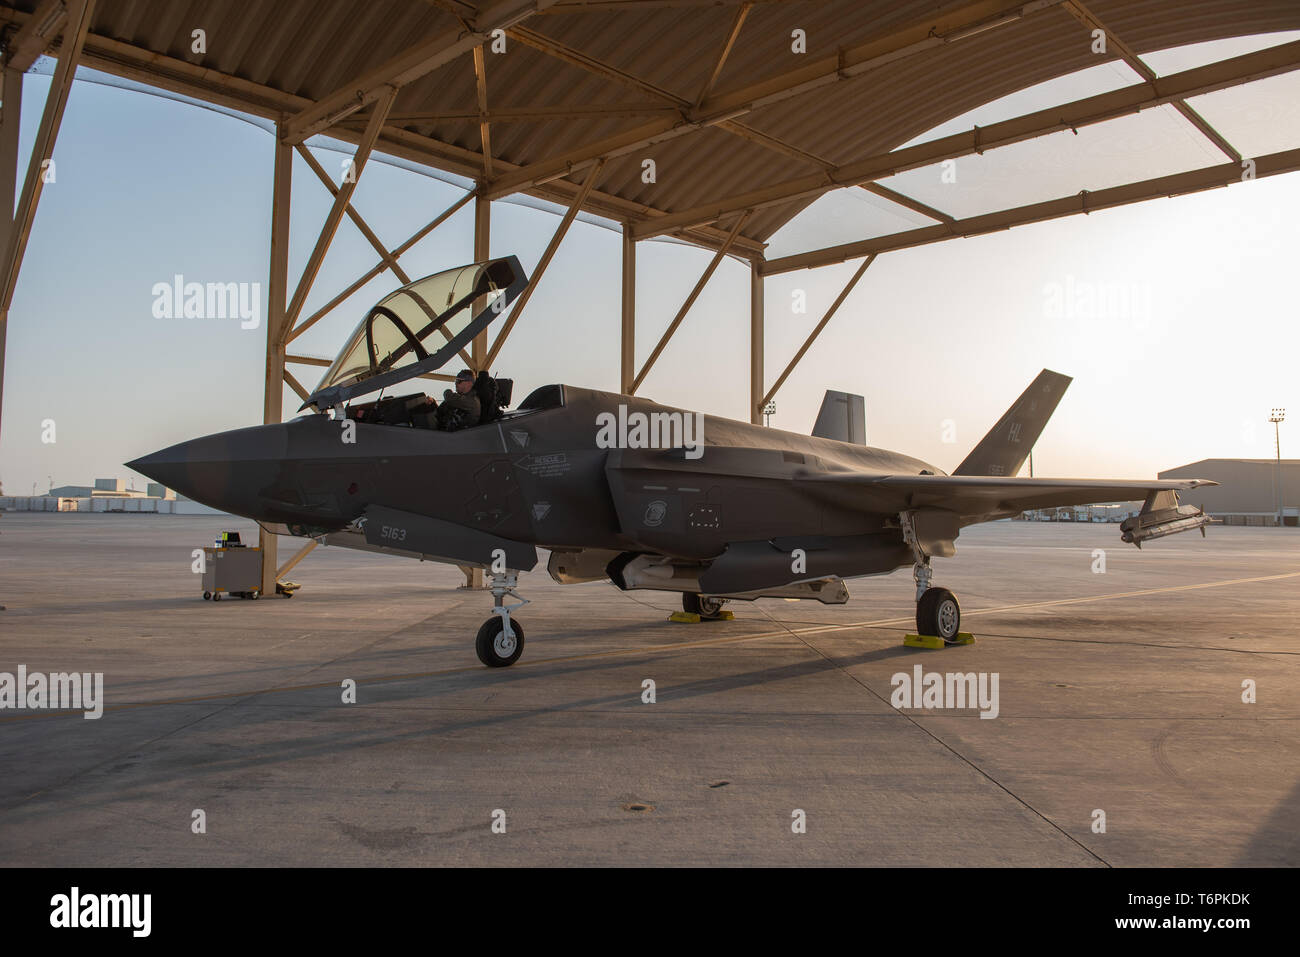 A 4th Expeditionary Fighter Squadron F-35A Lightning II pilot sits in his aircraft before a mission April 26, 2019, at Al Dhafra Air Base, United Arab Emirates. The stealth fighter brings the most modern technology to the U.S. Air Force’s inventory. (U.S. Air Force photo by Staff Sgt. Chris Thornbury) Stock Photo